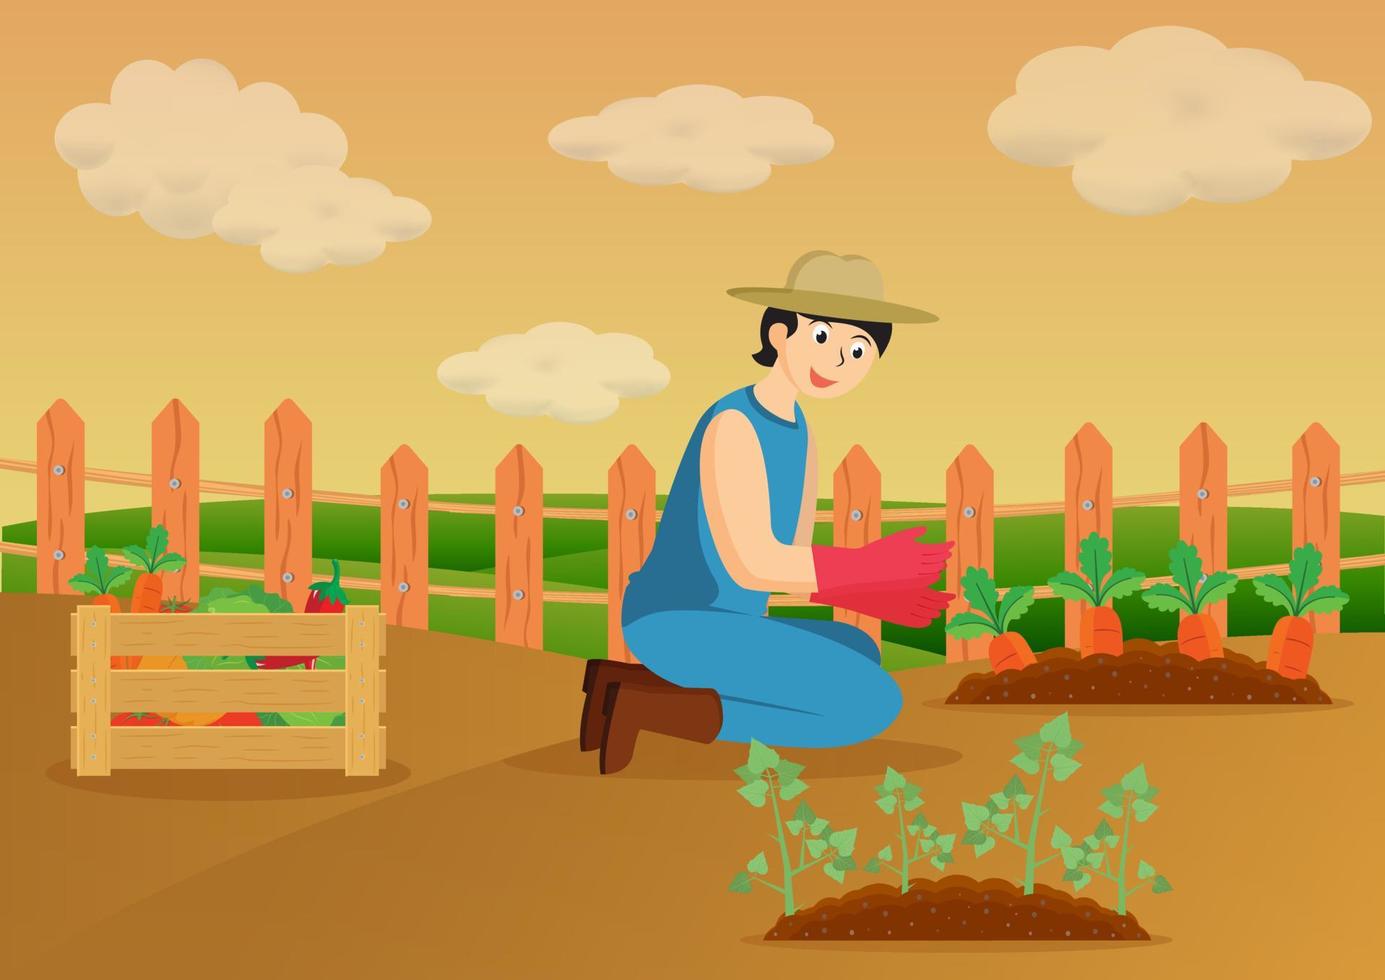 The farmer in the garden with his vegetable harvest vector